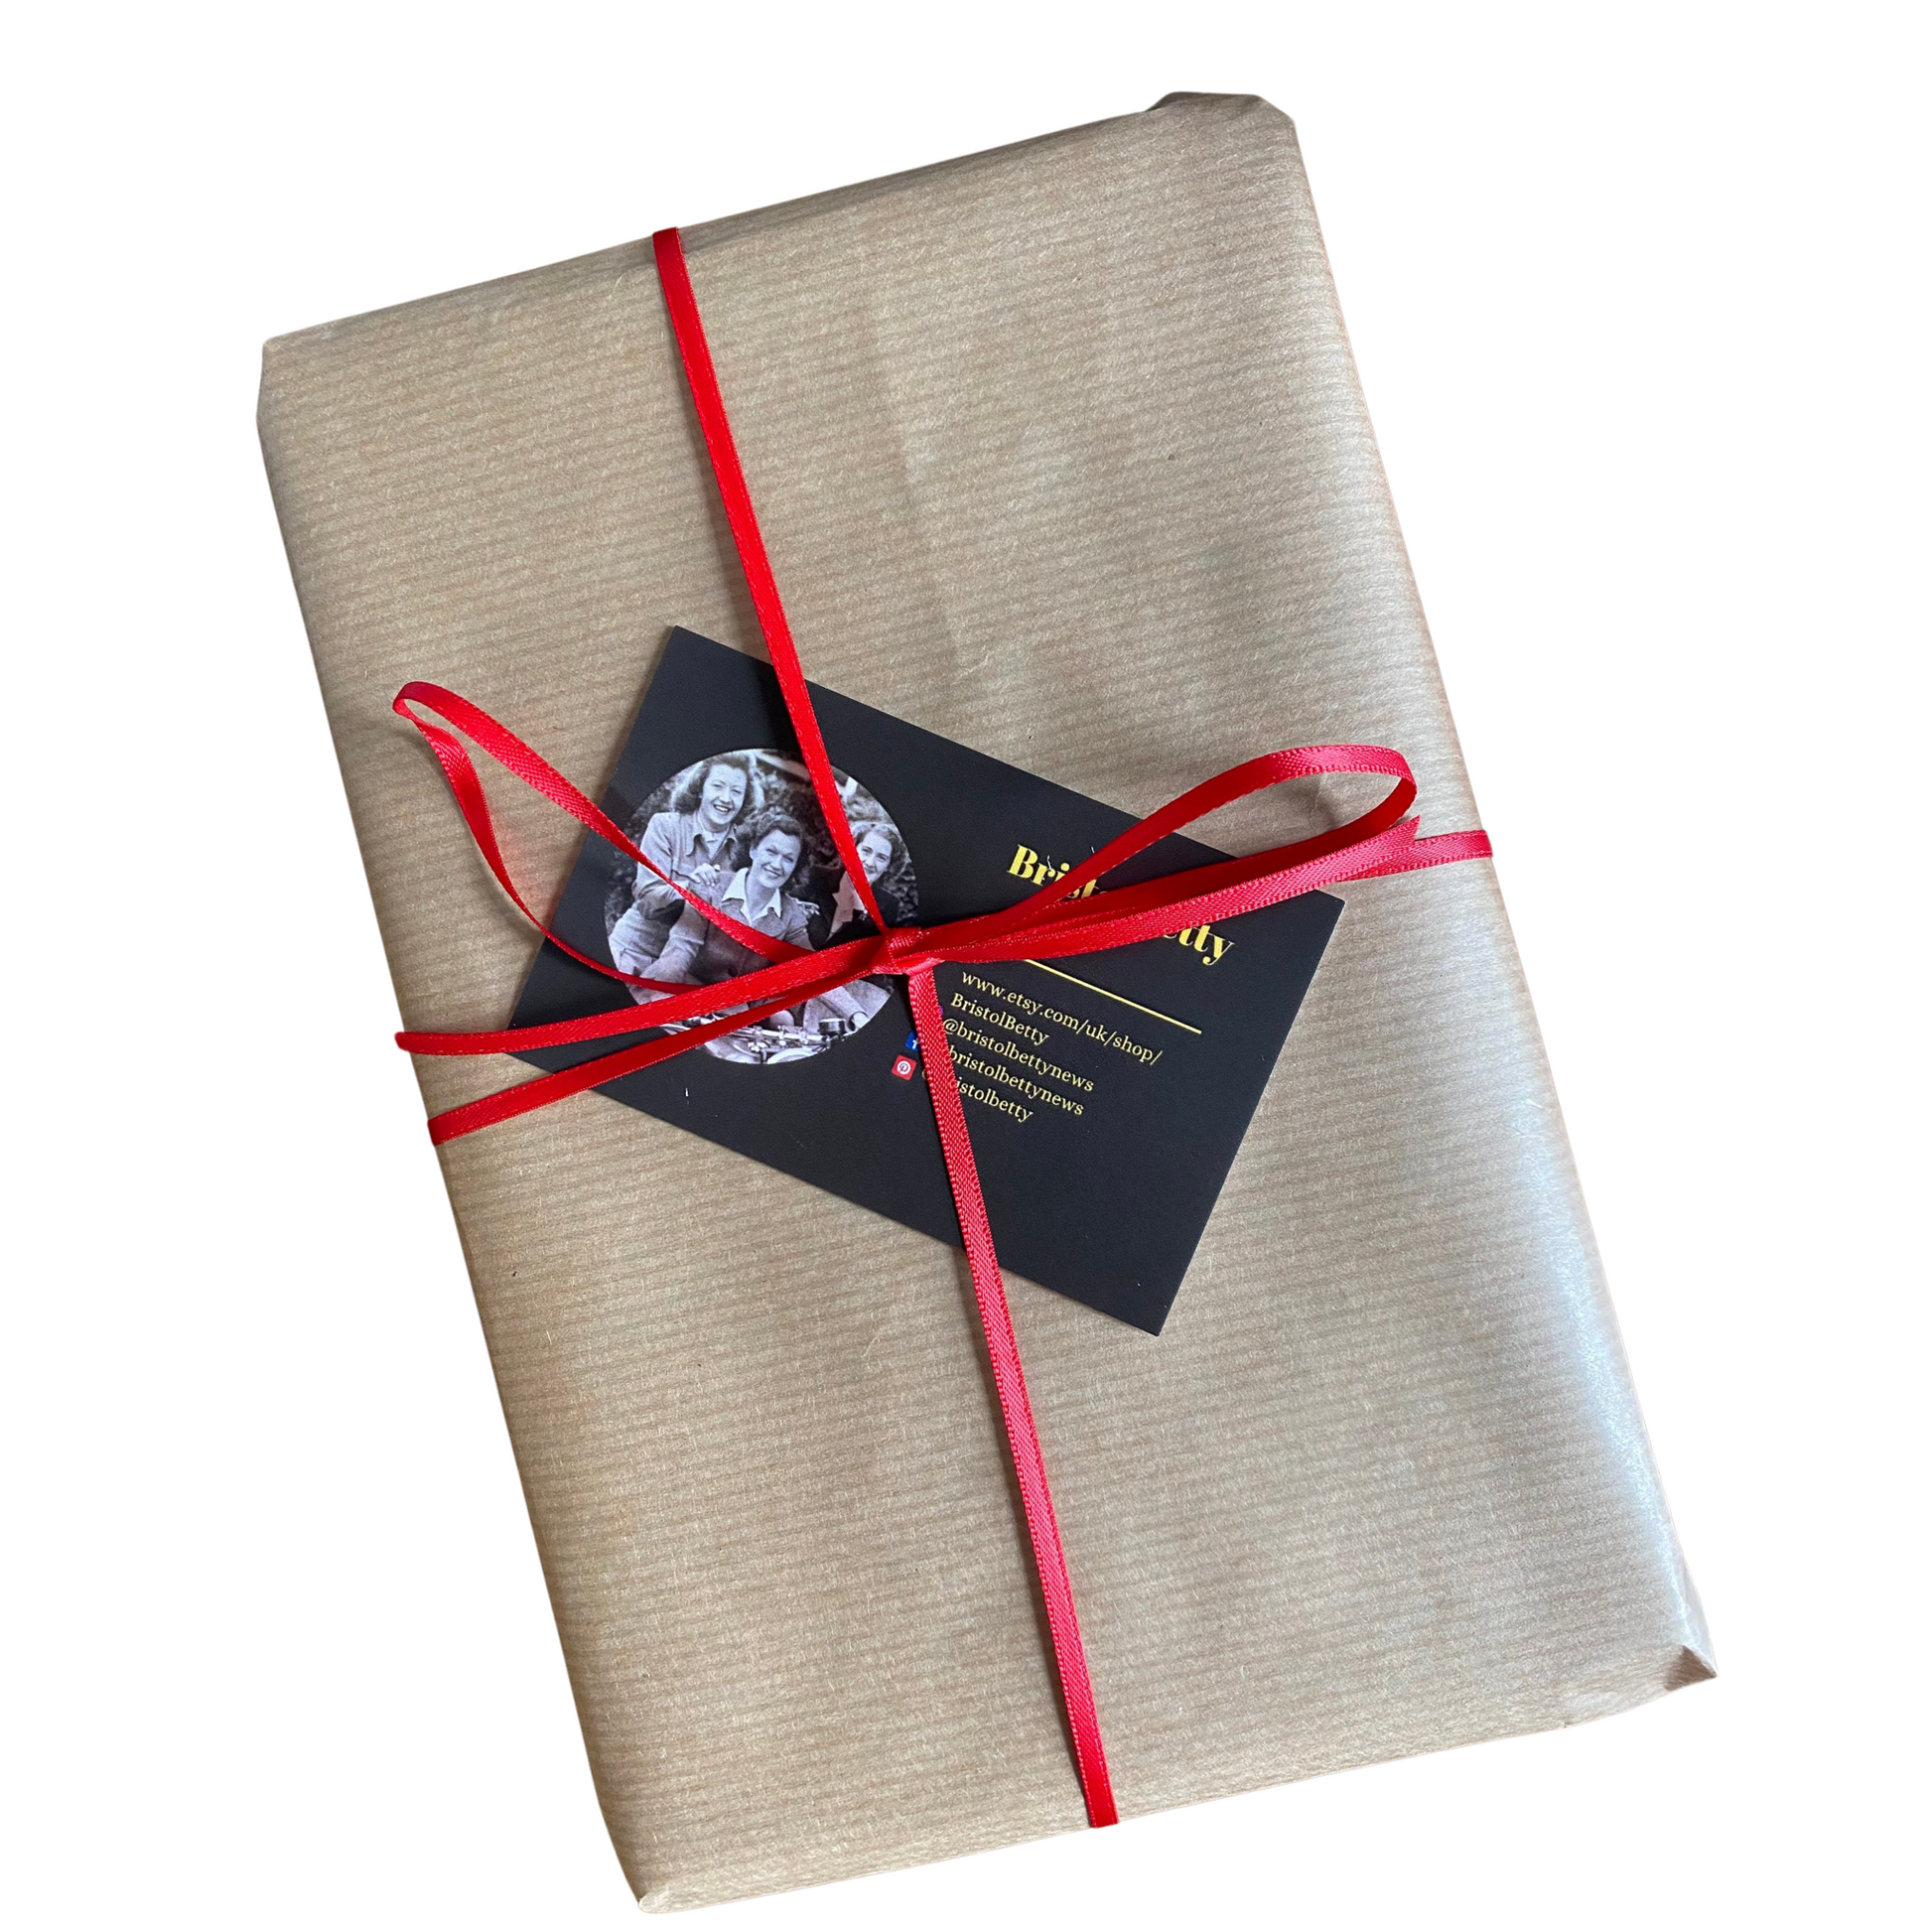 All orders are gift wrapped in Kraft paper and ribbon 